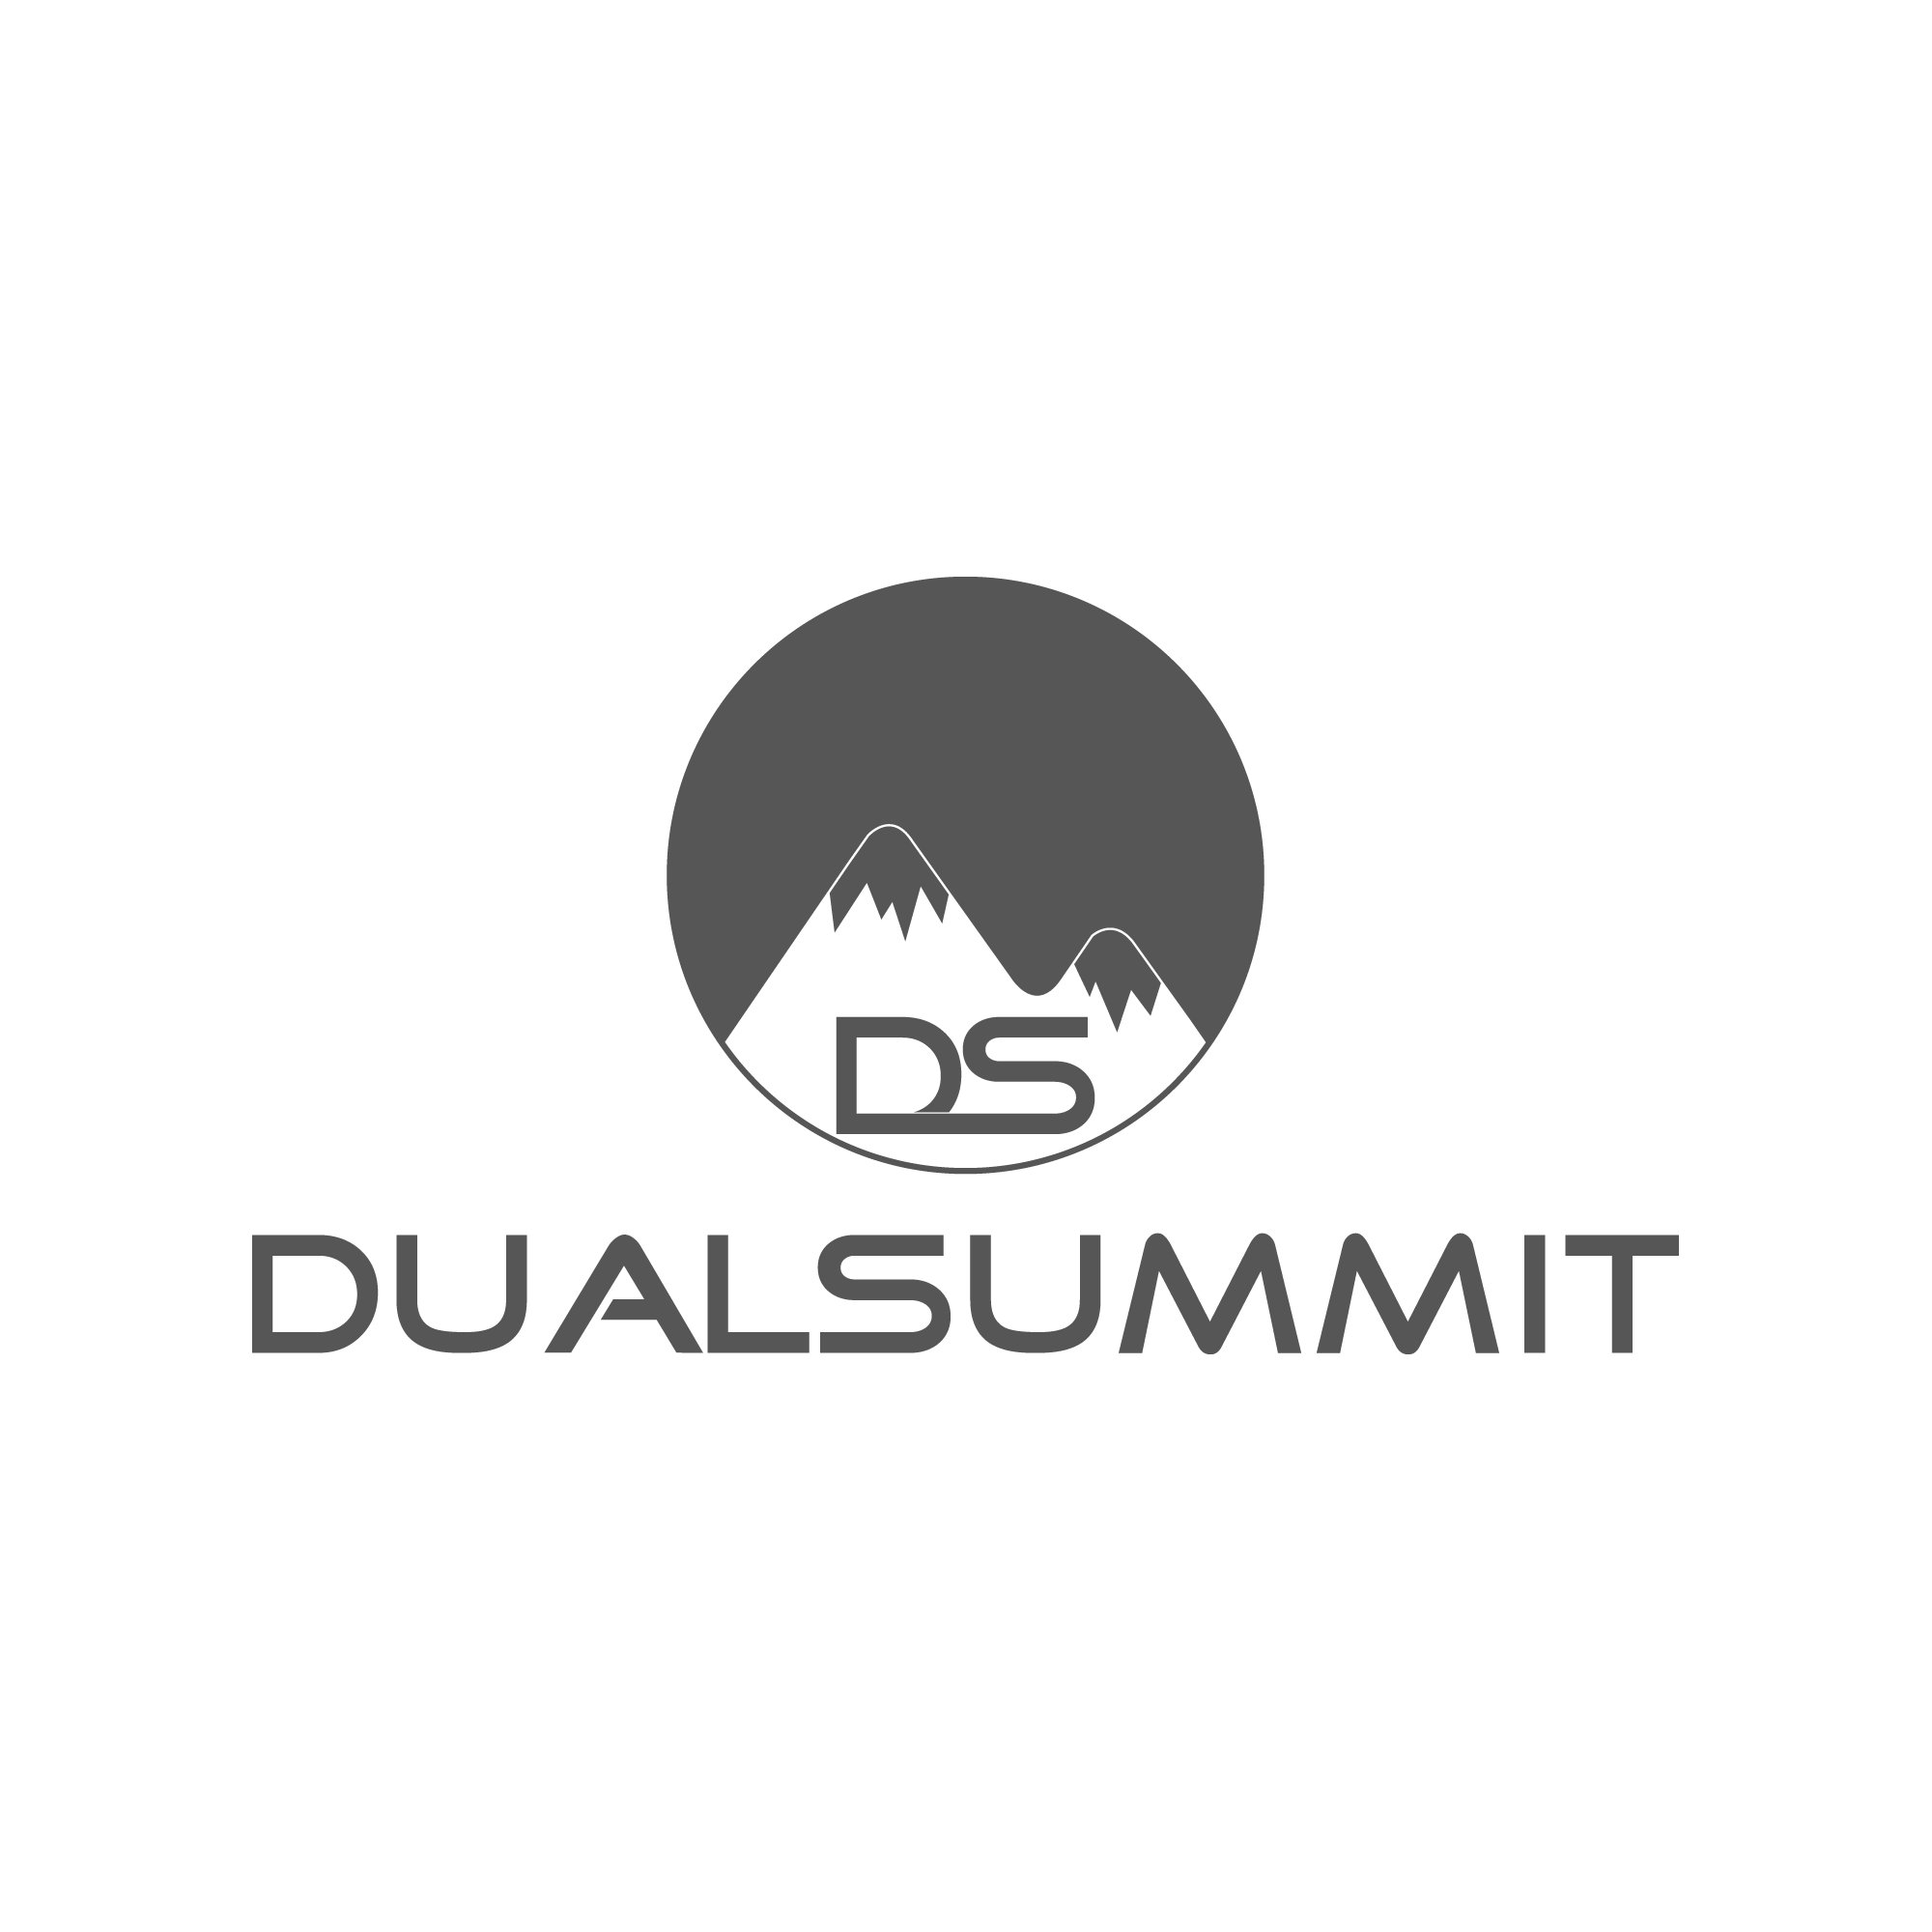 Twitter! We are Dual Summit! Follow us and we'll introduce you guys to the most random products for everyday life that we are going to sell!!